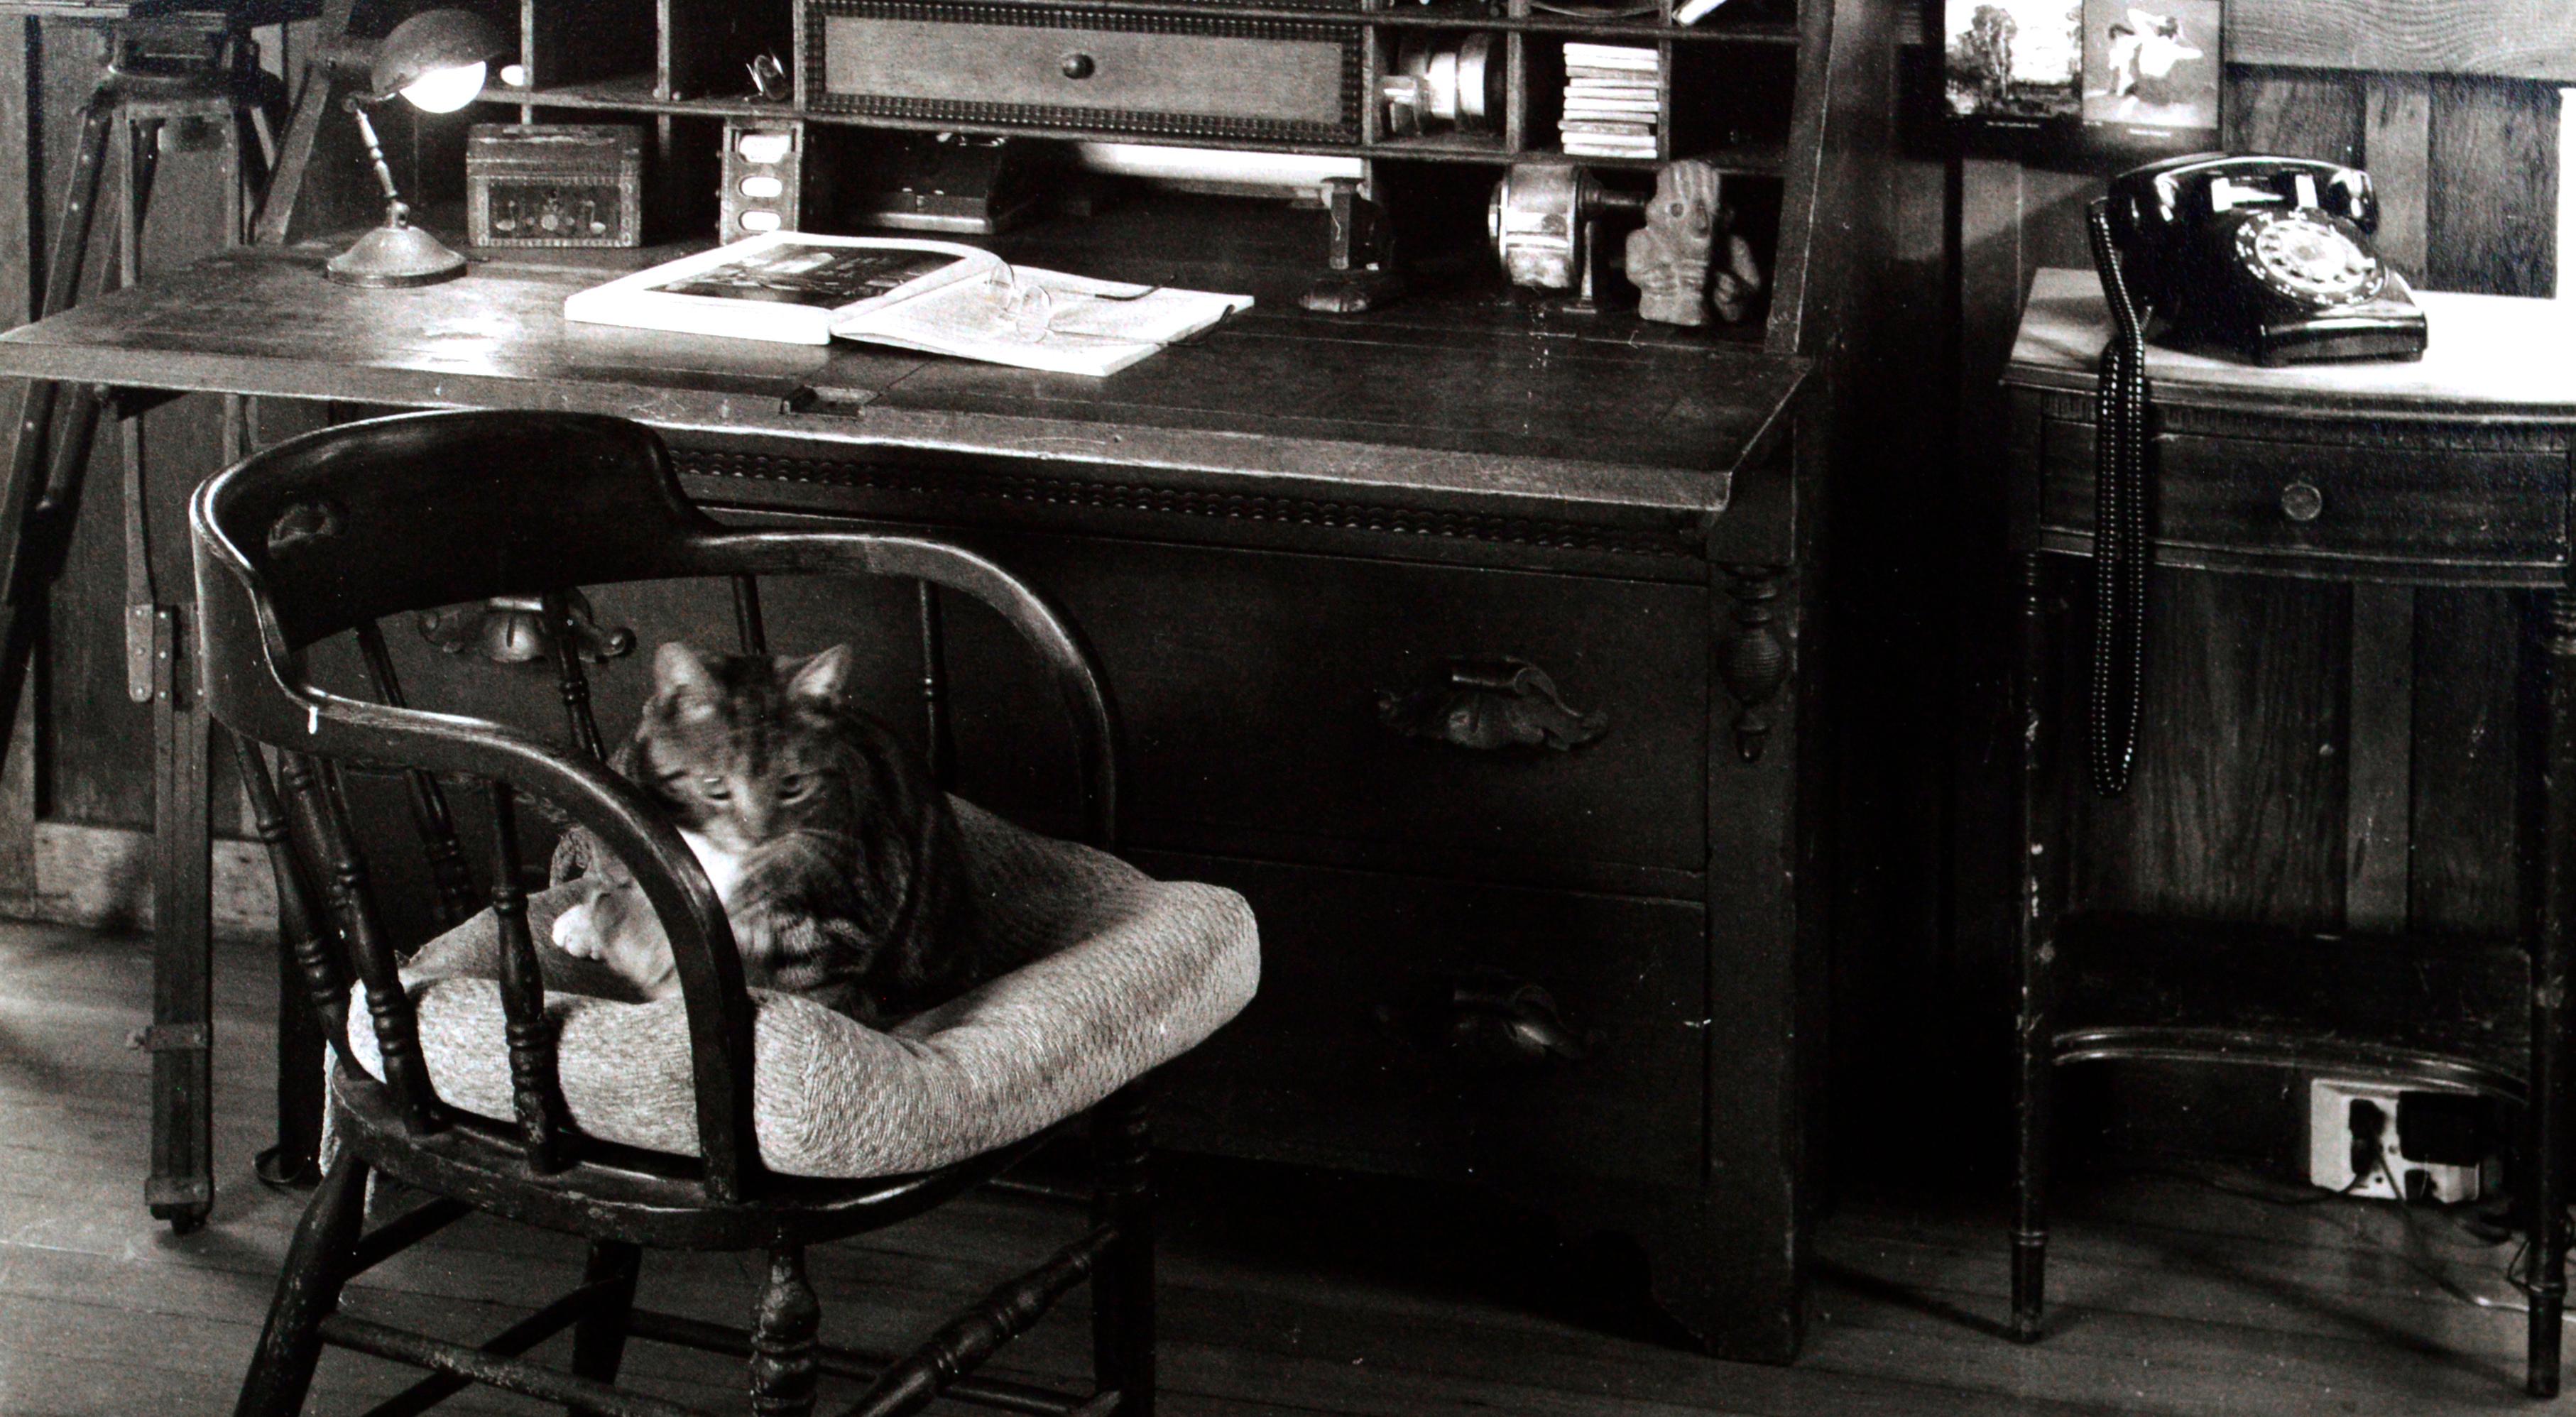 Black and white photograph of Edward Weston's desk, by Kim Weston (American, b. 1953). This photograph was taken in the former home of Edward Weston, Kim Weston's grandfather, and antique camera equipment can be seen in the photograph. Signed 